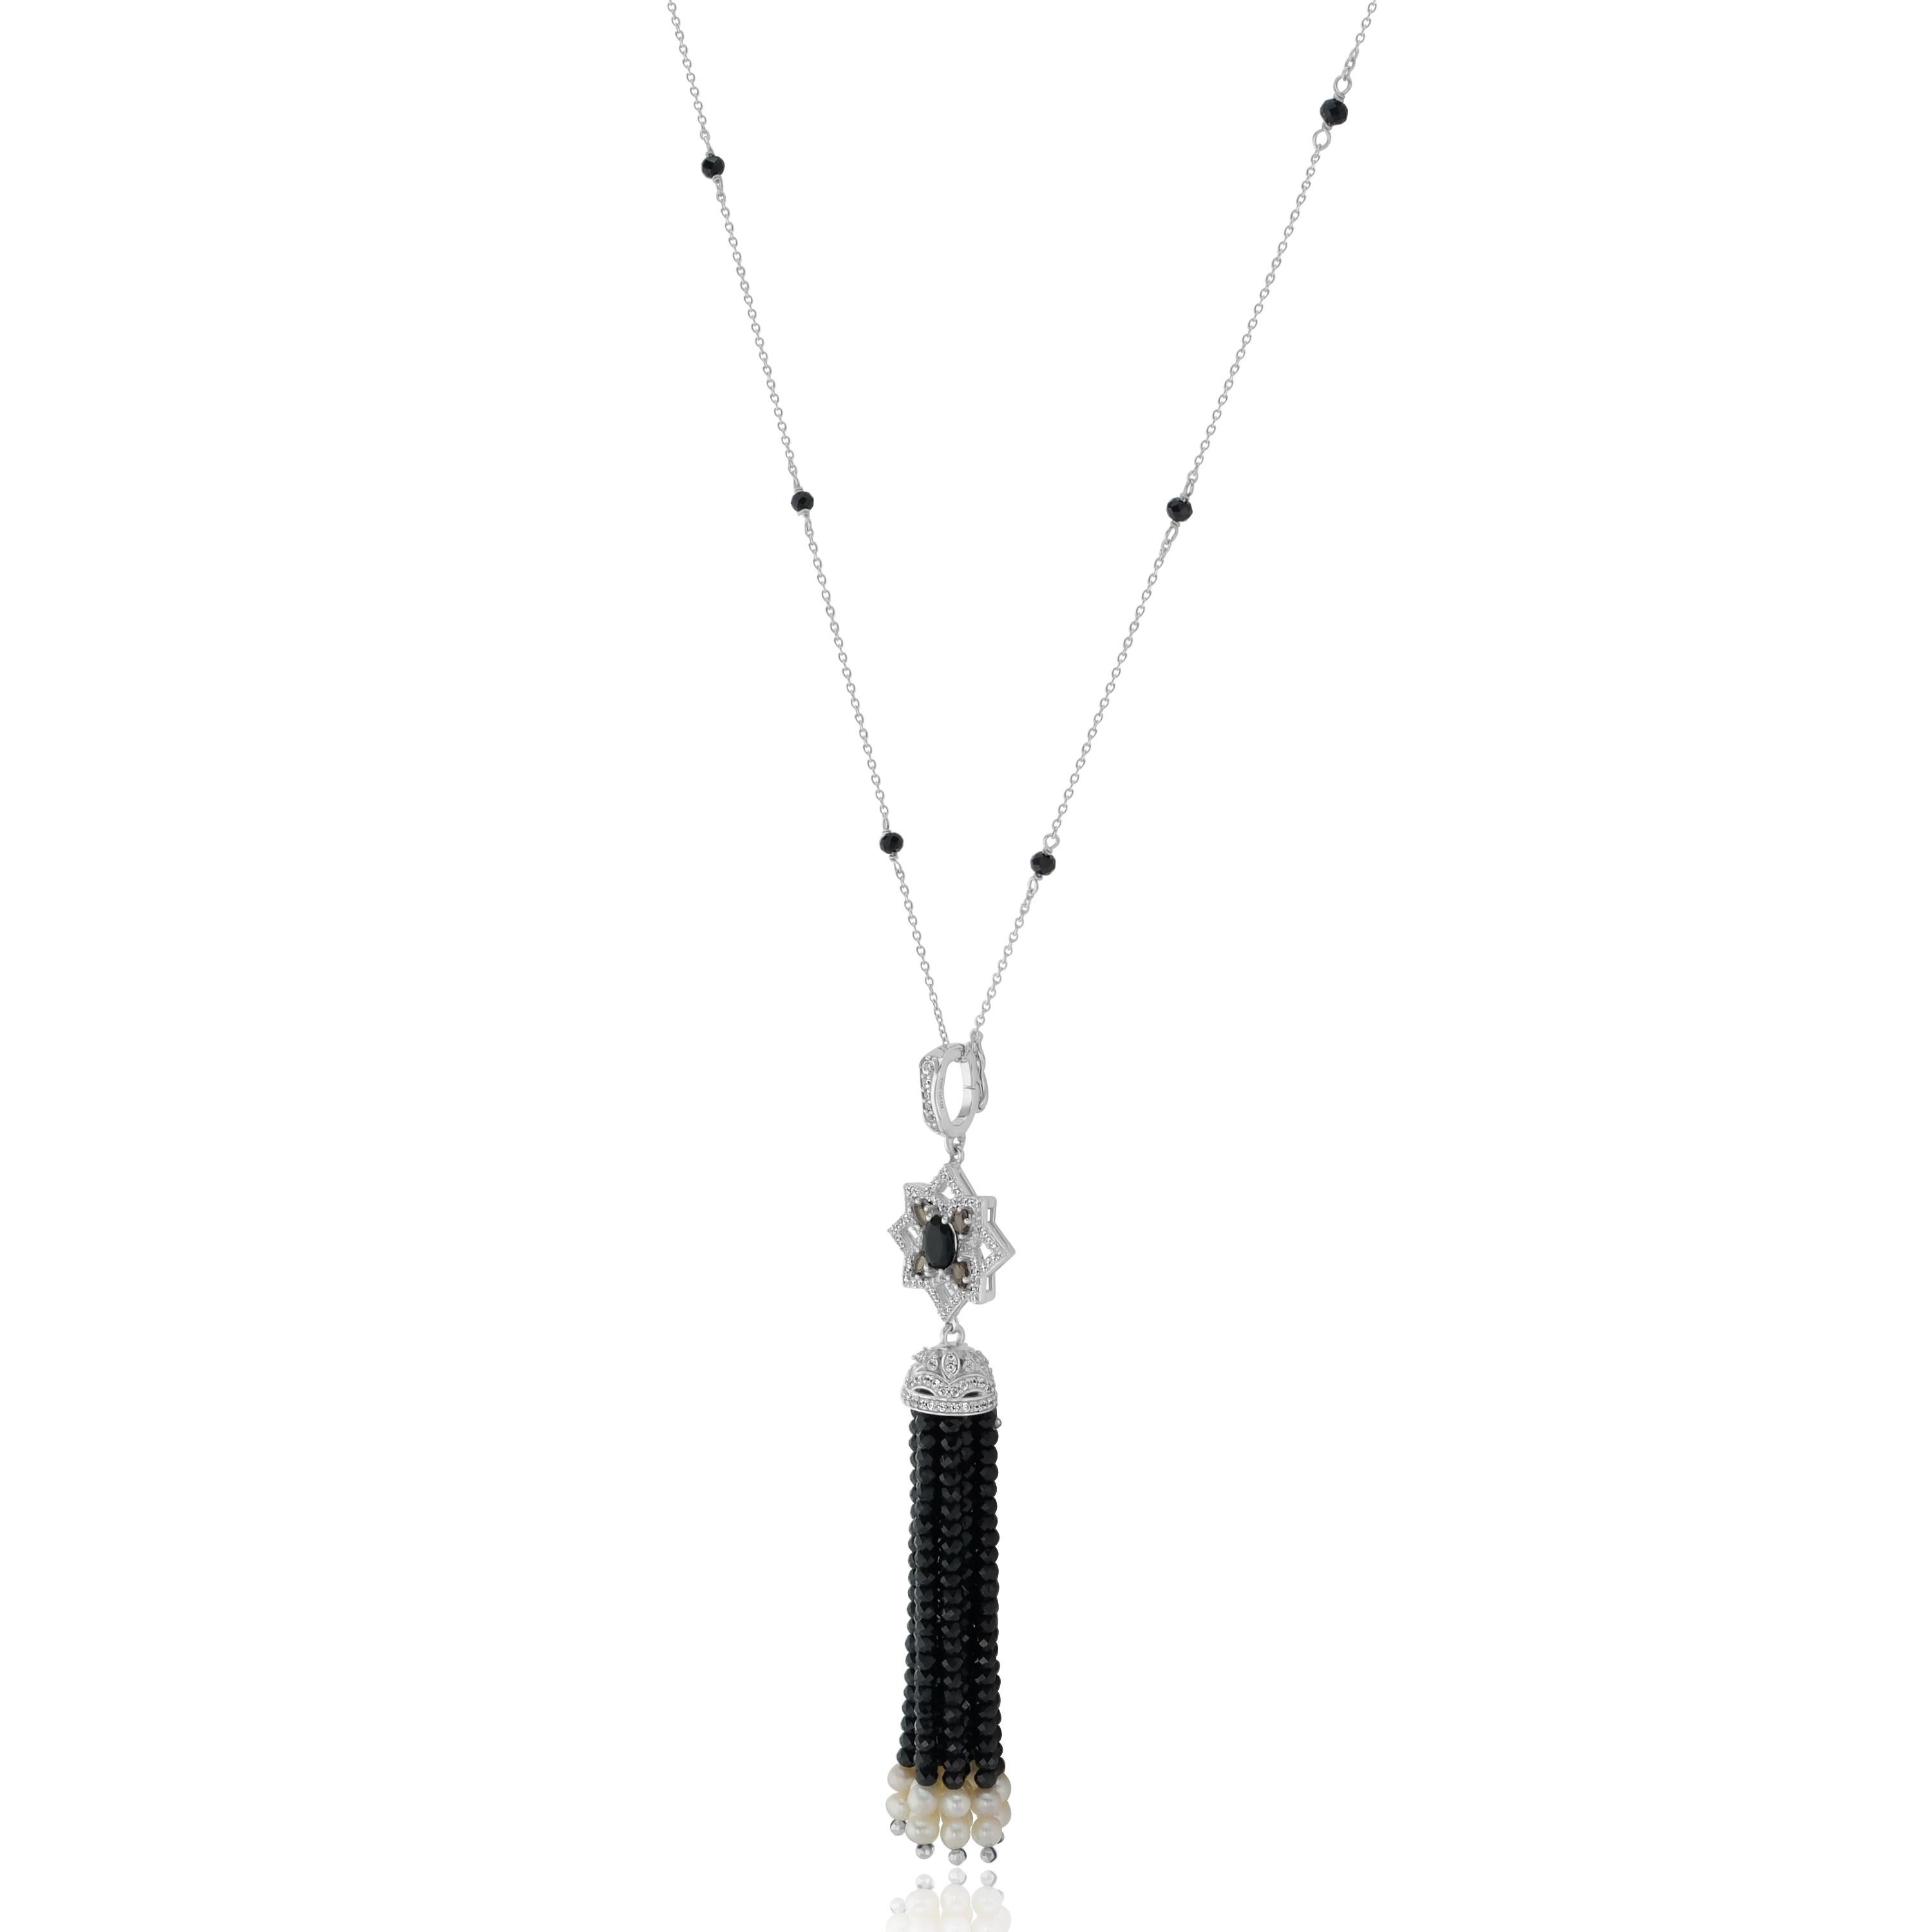 Modern 925 Sterling Silver Black Spinel Beads and Freshwater Pearl Tassel Necklace